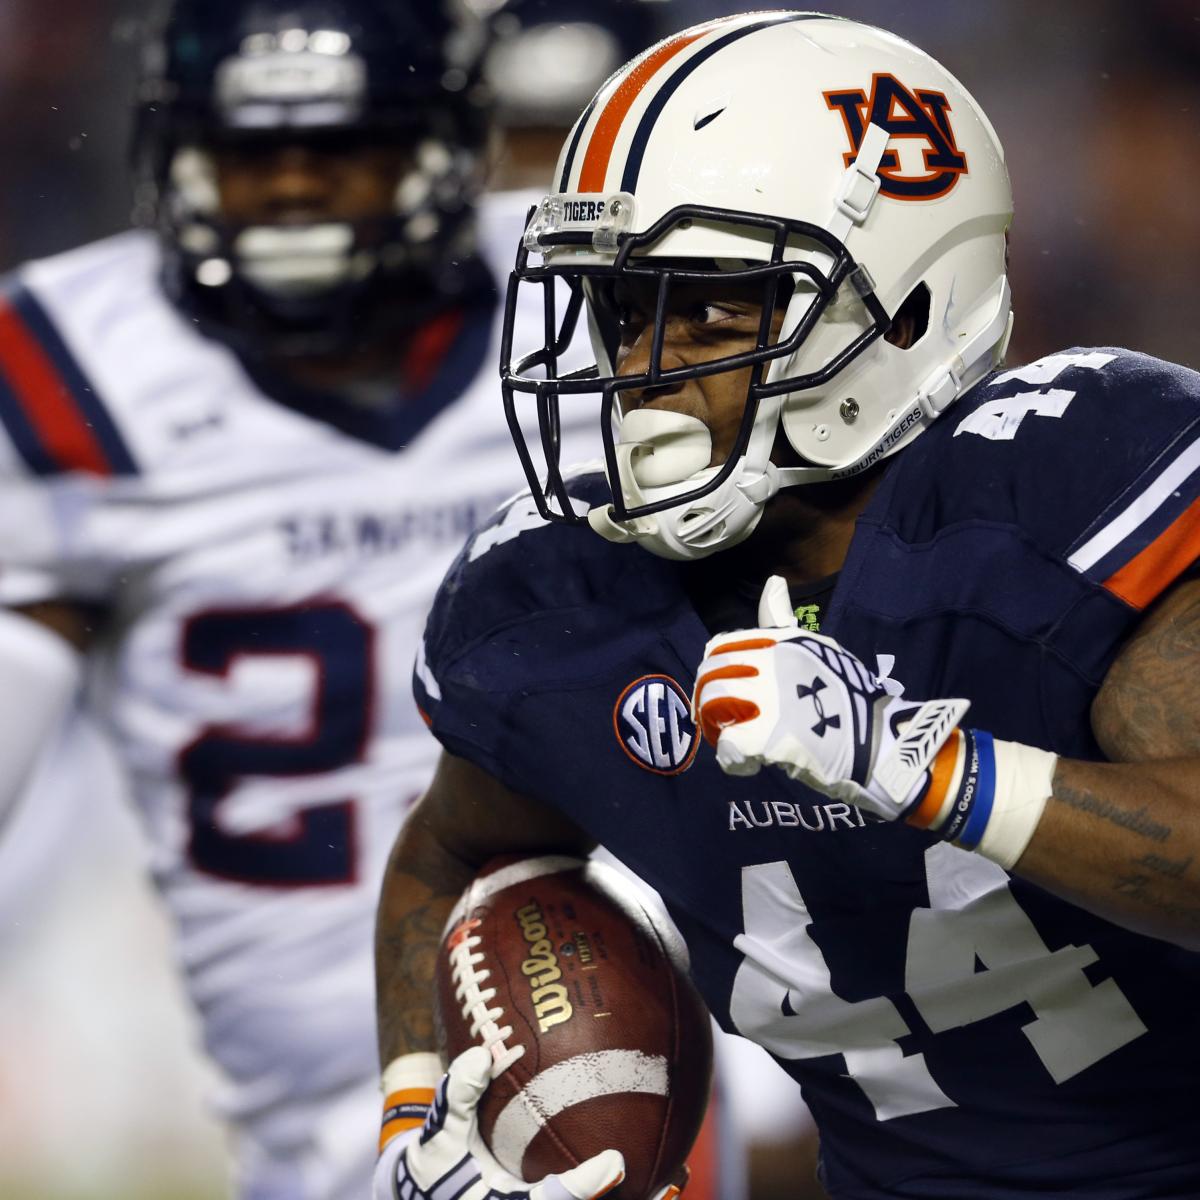 Samford vs. Auburn Game Grades and Analysis for the Tigers News